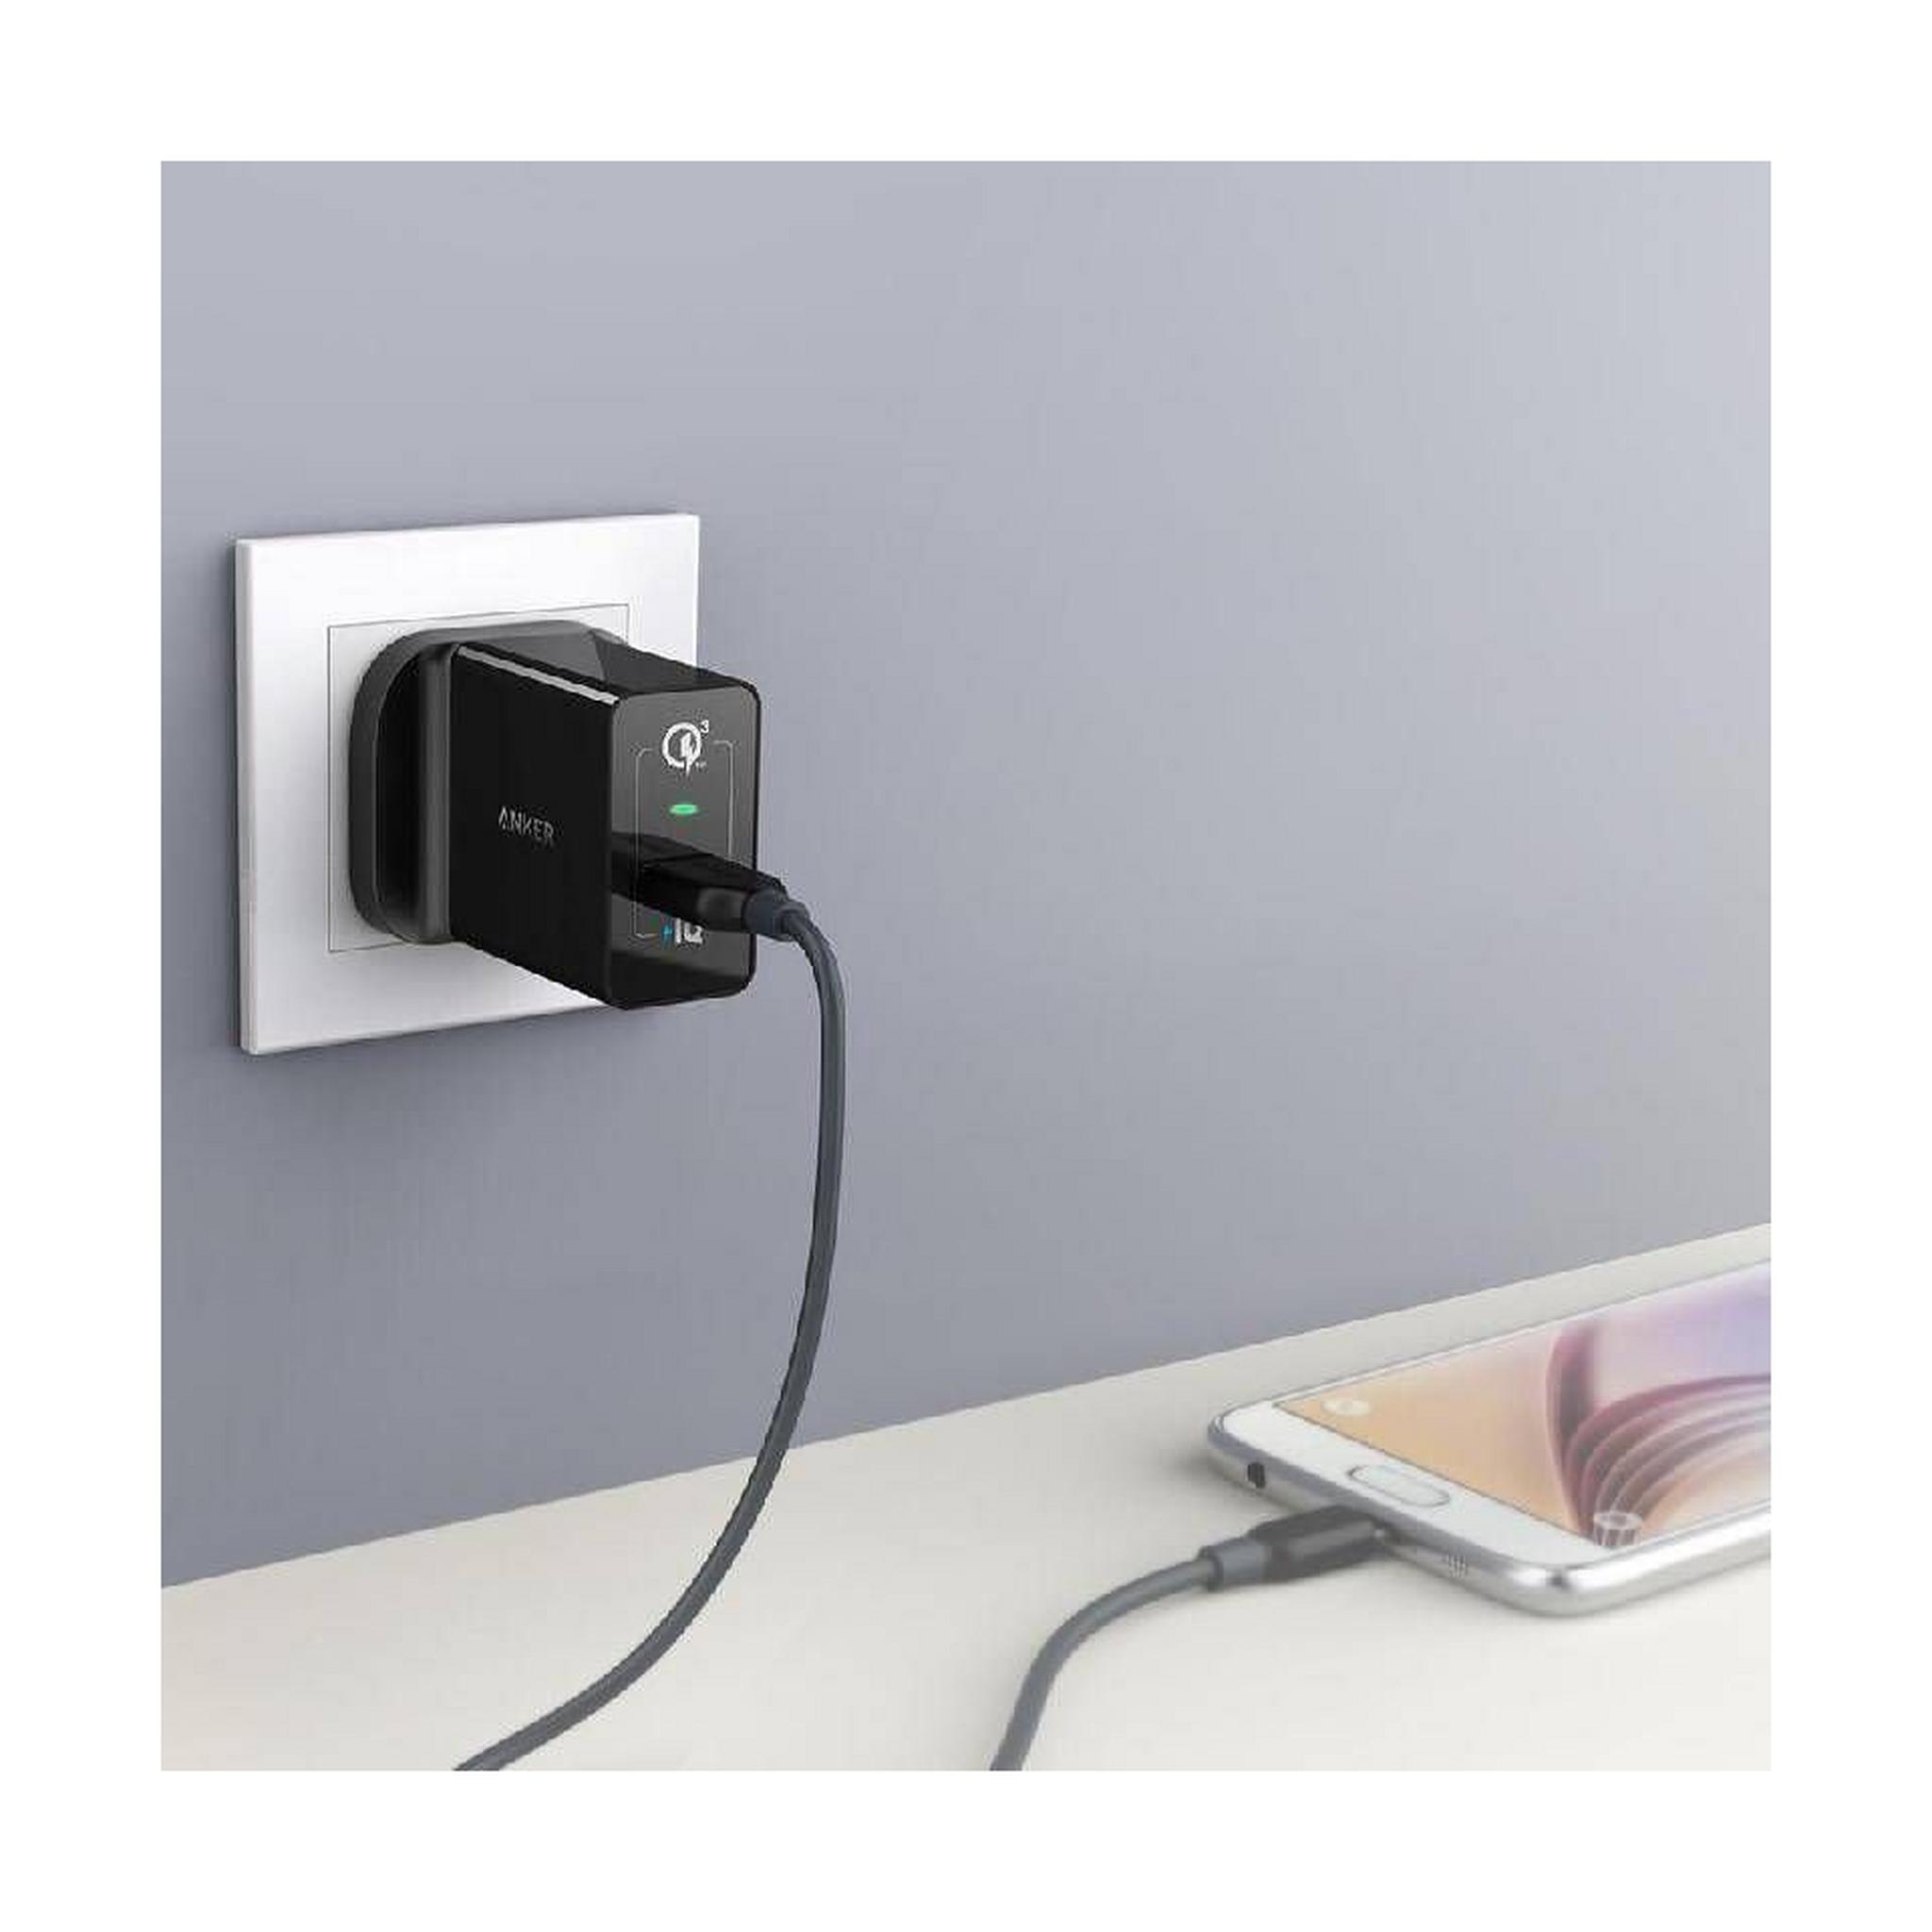 Anker PowerPort USB Home Charger - Black